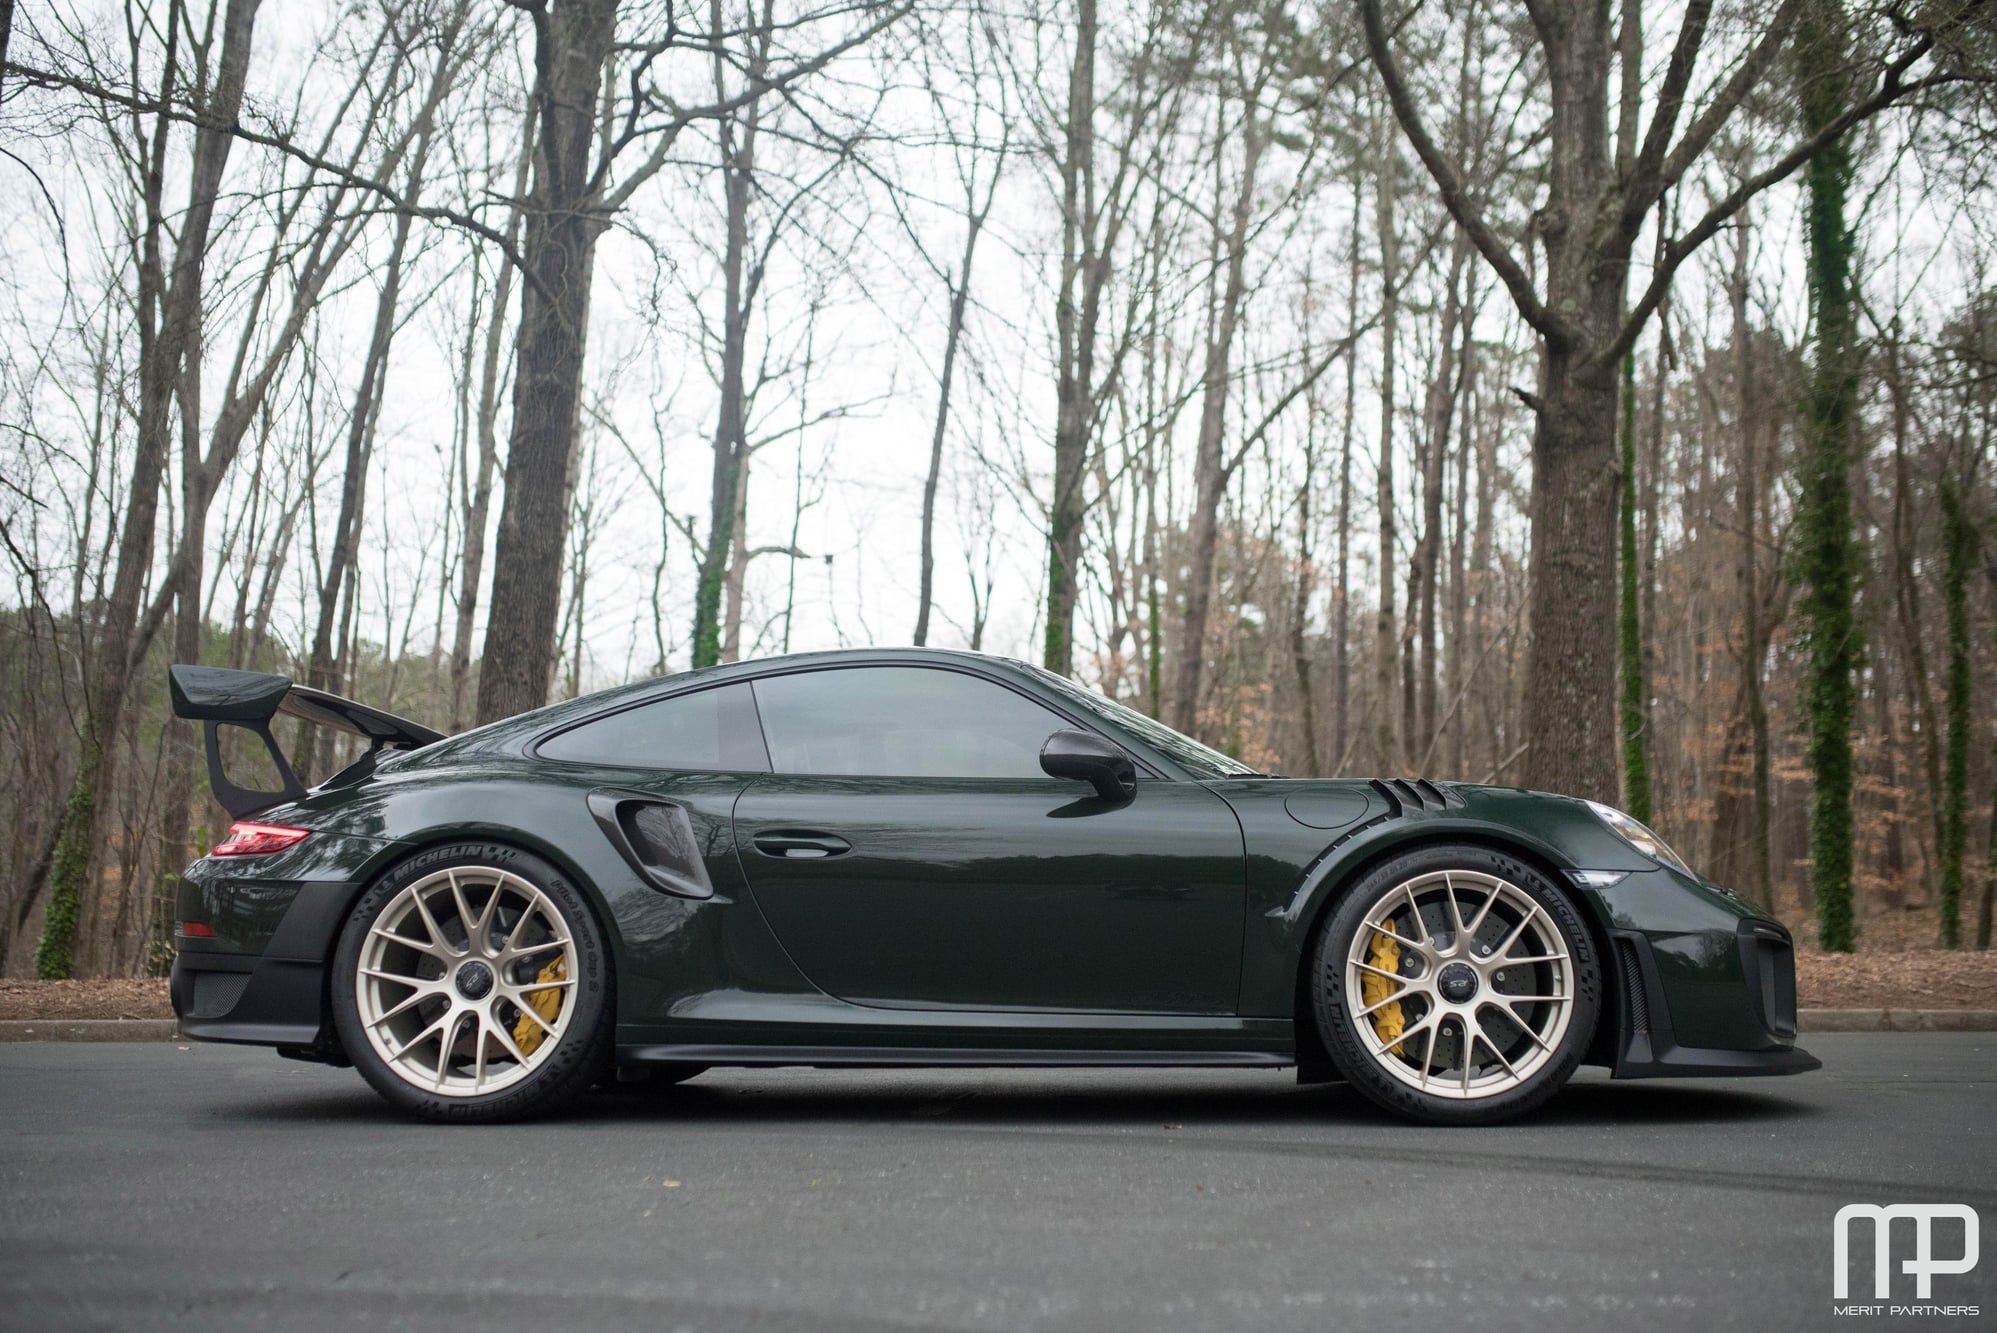 2018 Porsche GT2 - 2018 Porsche GT2RS Paint-to-Sample Brewster Green - Used - VIN WP0AE2A90JS185767 - 1,500 Miles - 6 cyl - 2WD - Automatic - Coupe - Other - Atlanta, GA 30360, United States